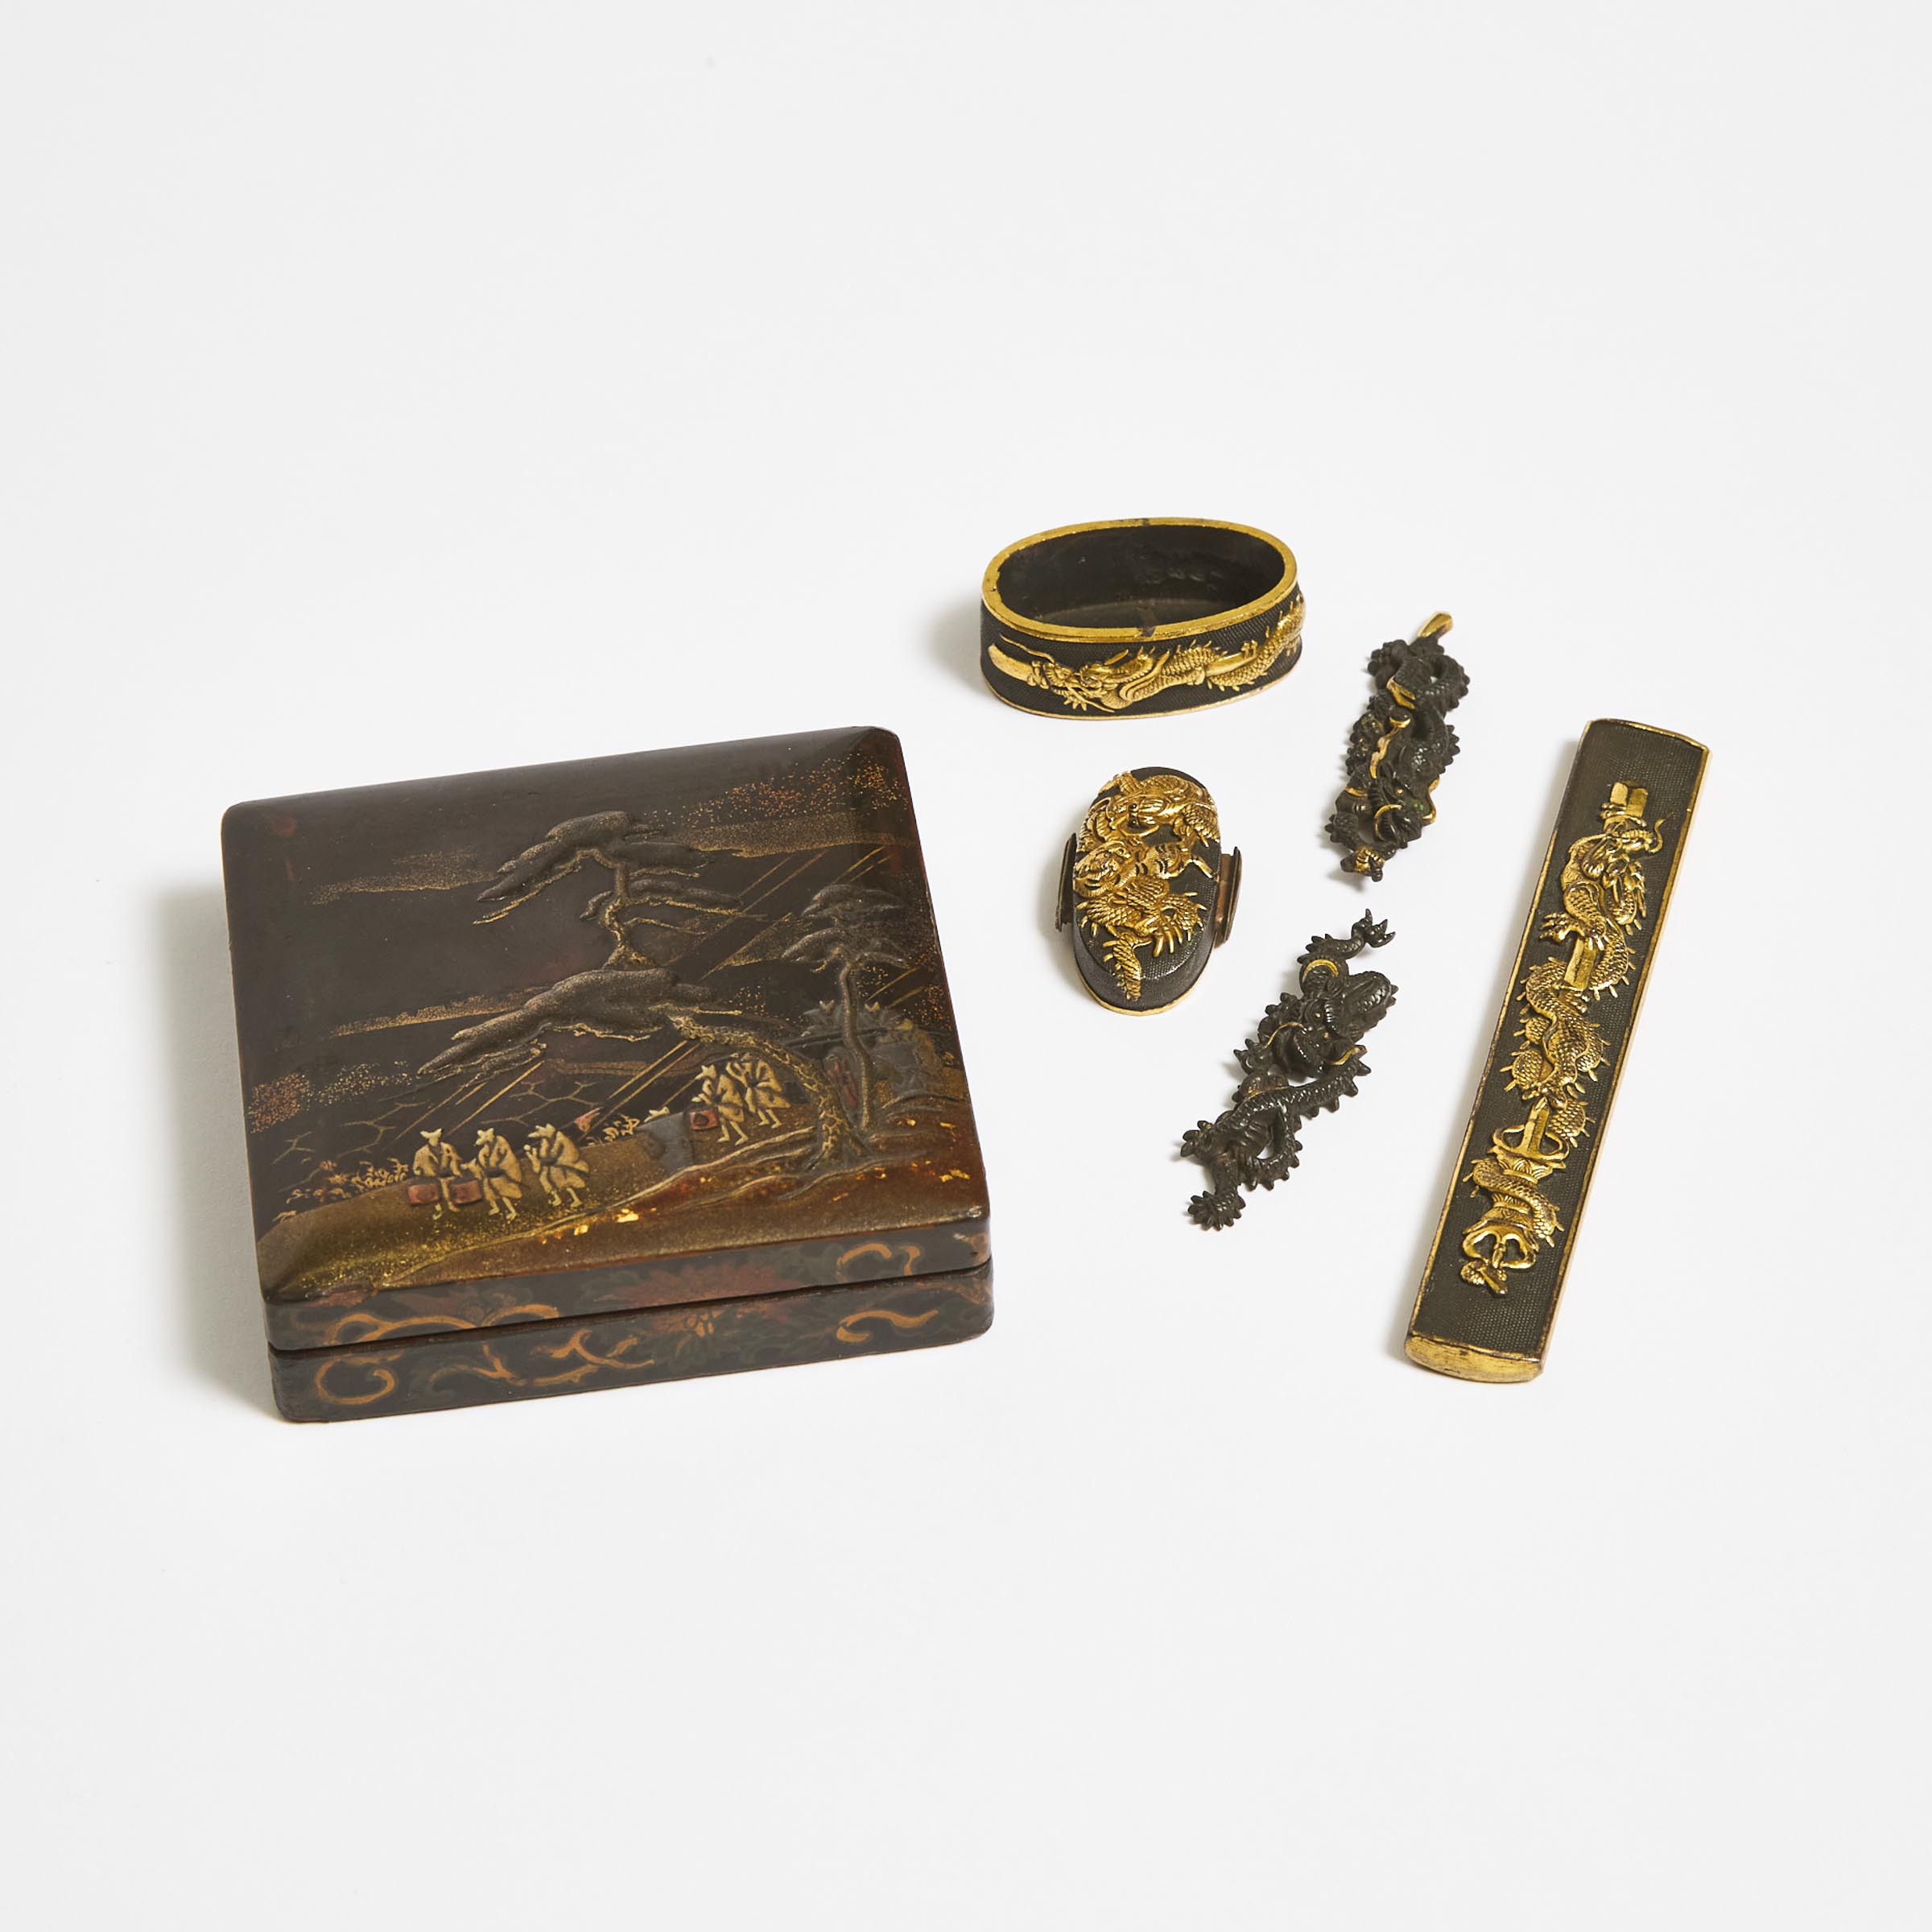 A Set of Five Parcel Gilt 'Dragon' Sword Fittings, Together With a Lacquer Box, 19th Century